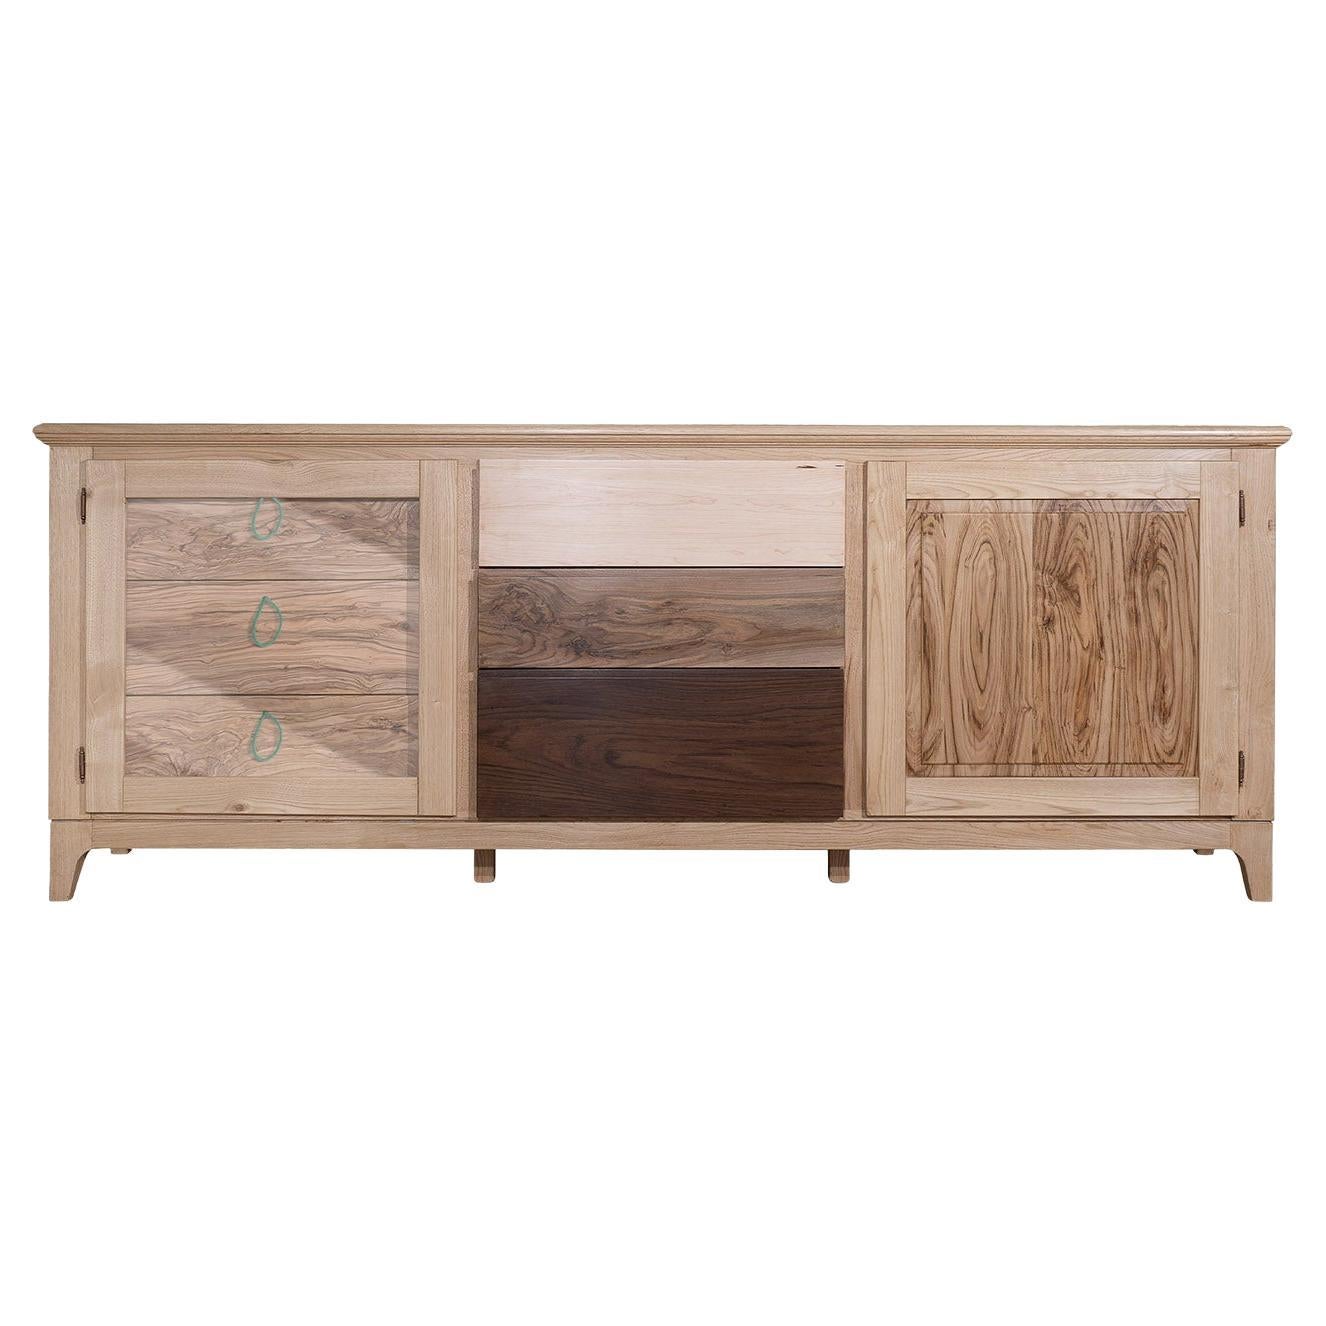 Mosaiko Chestnut Sideboard by Erika Gambella For Sale